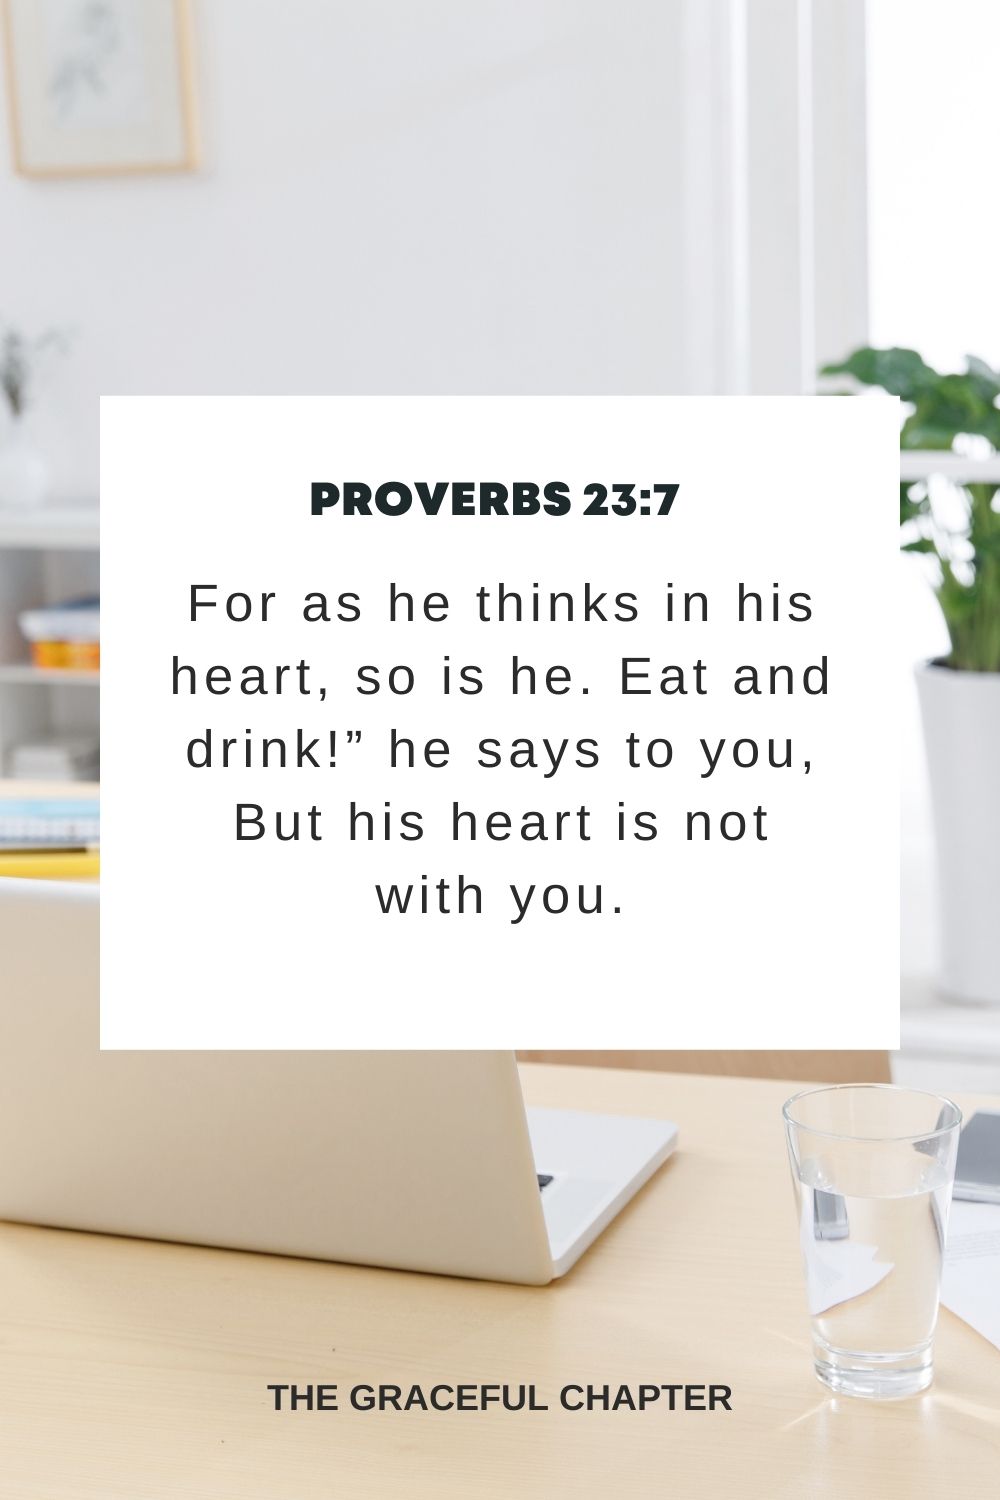 For as he thinks in his heart, so is he. Eat and drink!” he says to you, But his heart is not with you. Proverbs 23:7